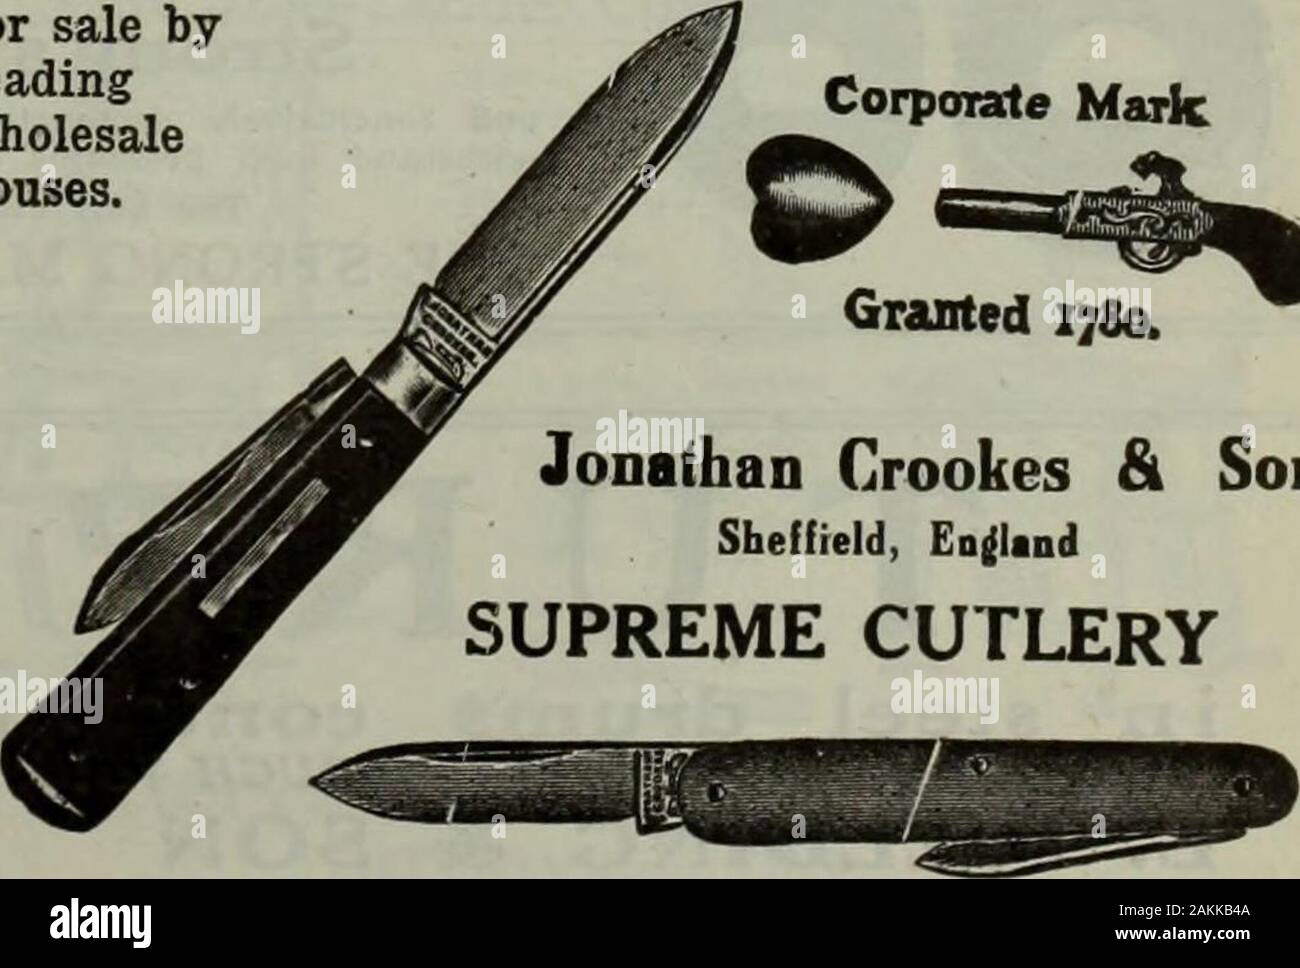 Hardware merchandising September-December 1919 . SOLDERING IRONS OF ANY SIZE OR SHAPE, also COPPER FORGINGS for any kinds of Gas Heated Irons SPECIAL QUOTATIONS FOR LARGE QUANTITIES WE CAN SUPPLY ALL KINDS OFCHAINS, SHIPPING TACKLEPCPCINGS IN IRON, STEEL ANDCOPPER. Buy direct from makers. Contractors to H.M. Government J. S. ROCK & S0NS,Beecher Works UKAULtY, ENG,&gt; Telegrams:Rock, Beecher, Cradley Send us your inquiries for STAMPINGS We shall be pleased to give estimateson your requirements. HAMILTON MOTOR WORKS LIMITEDHamilton, Canada For sale byLeadingWholesaleHouses.. Corporate MarkGrant Stock Photo